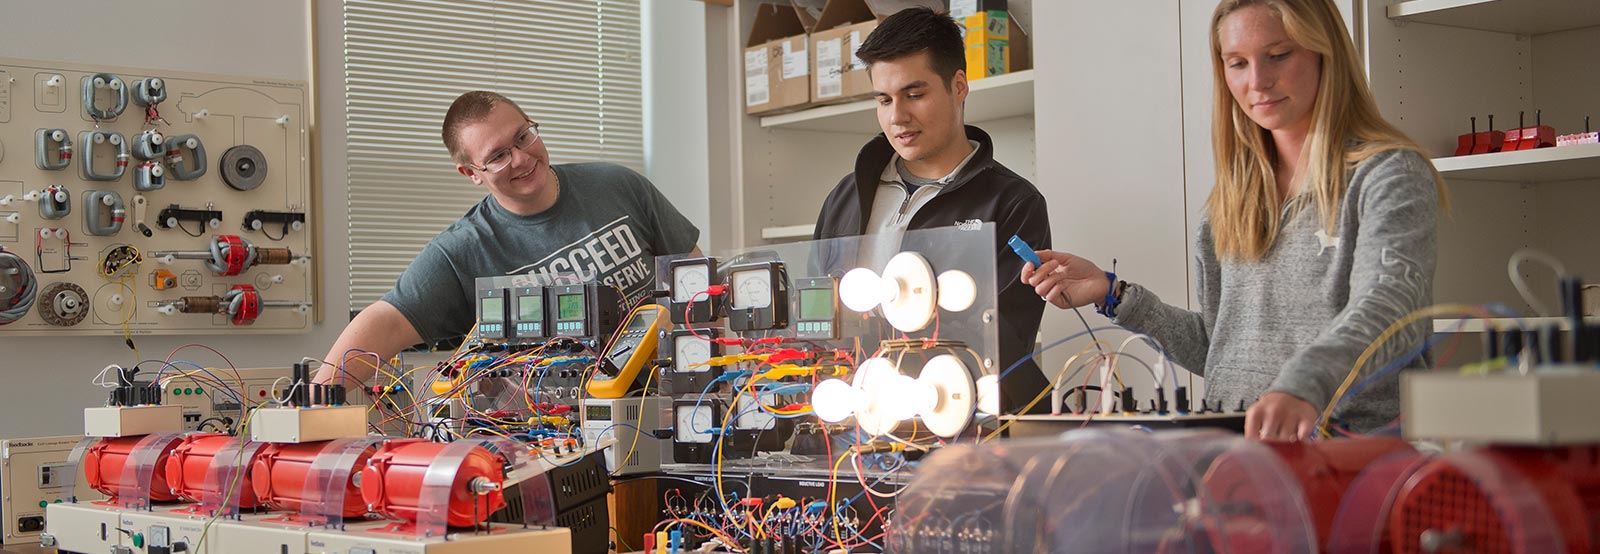 Students working in electrical engineering lab